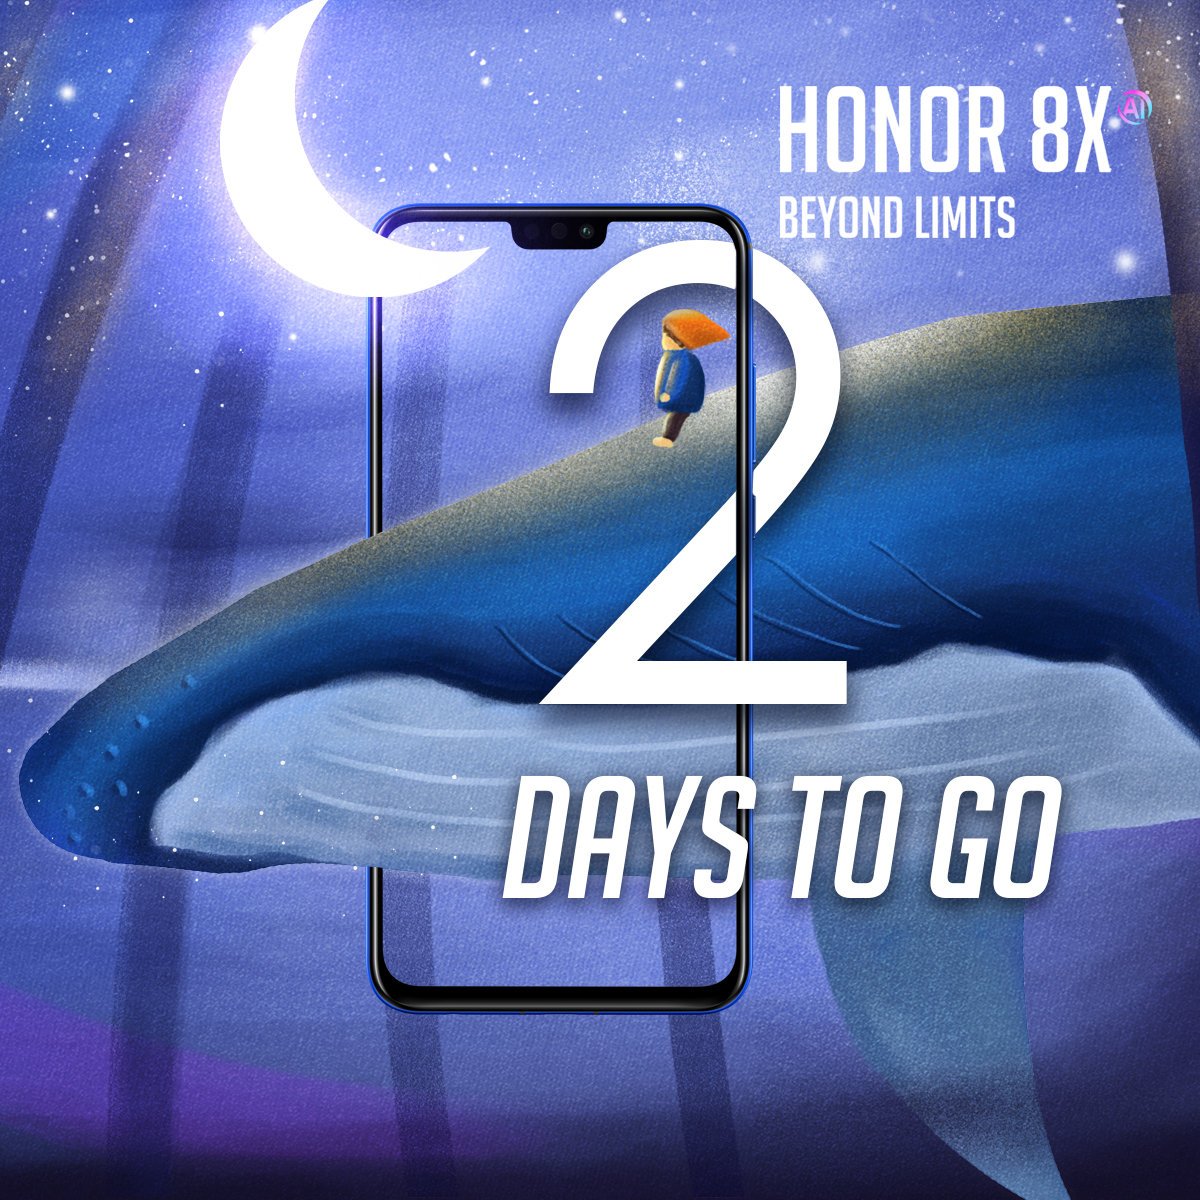 2 days for Honor 8X launch